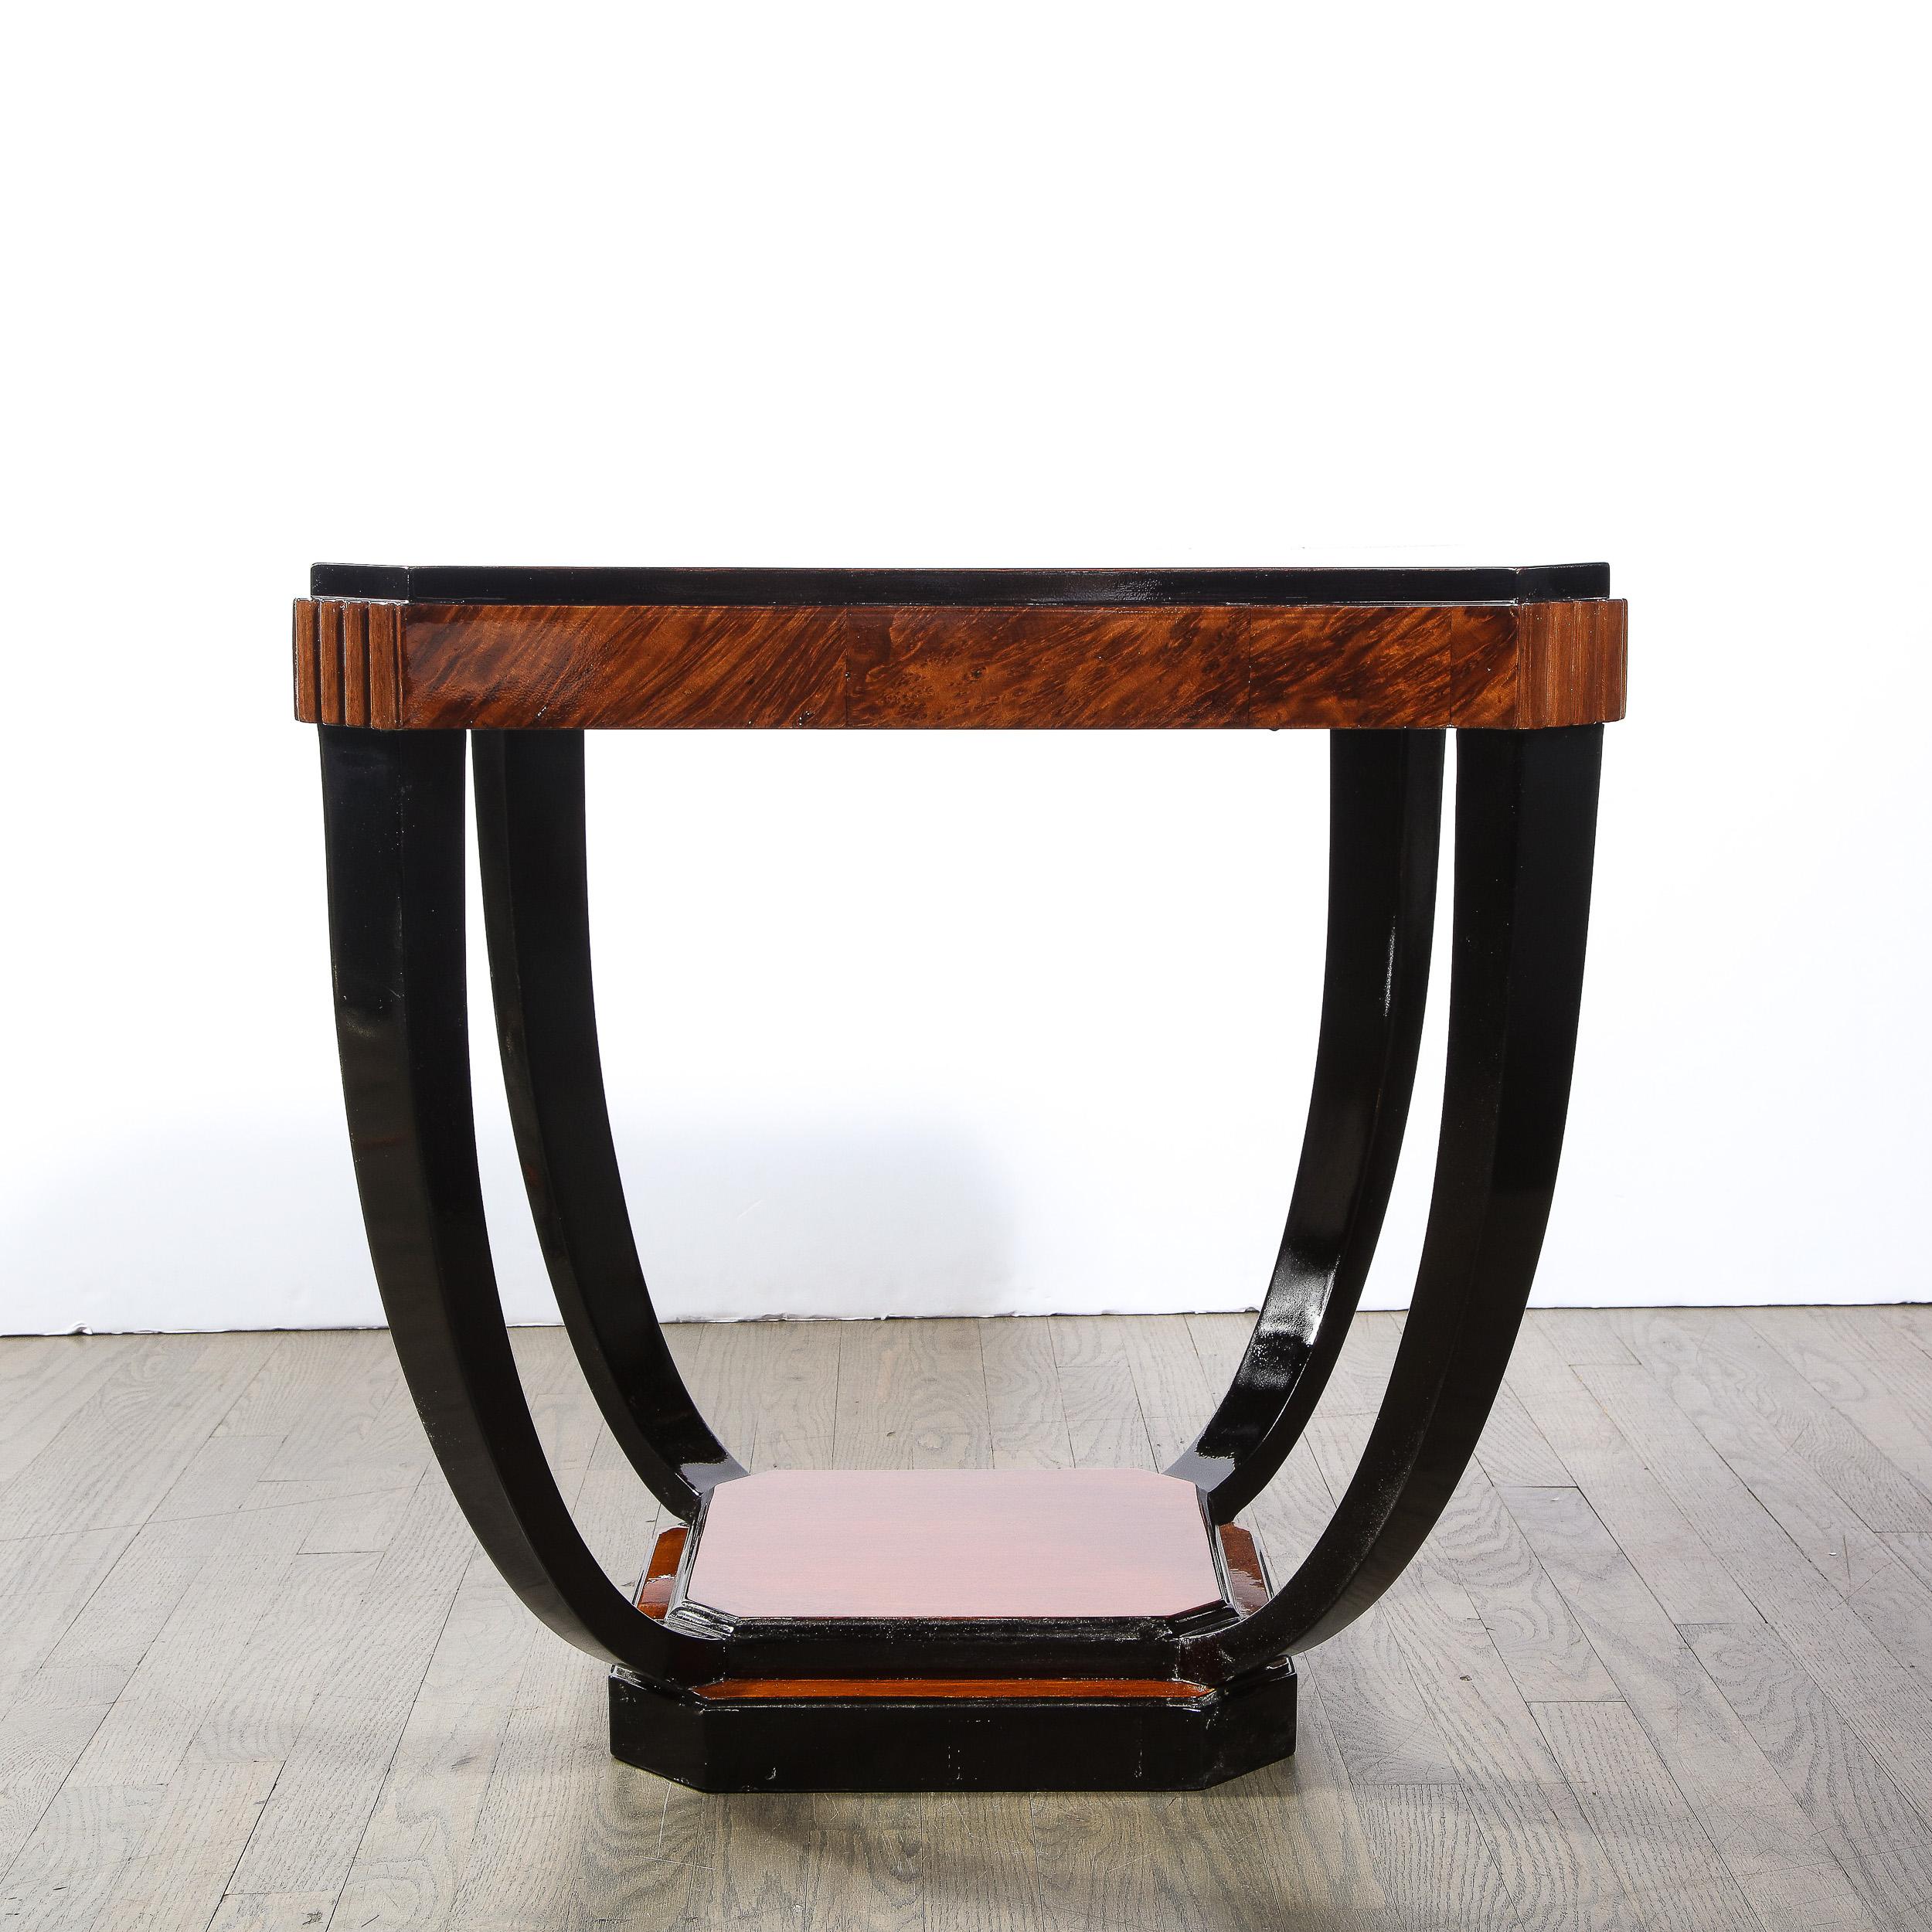 Art Deco Streamlined Cocktail Table in Bookmatched Burled Walnut & Black Lacquer For Sale 5